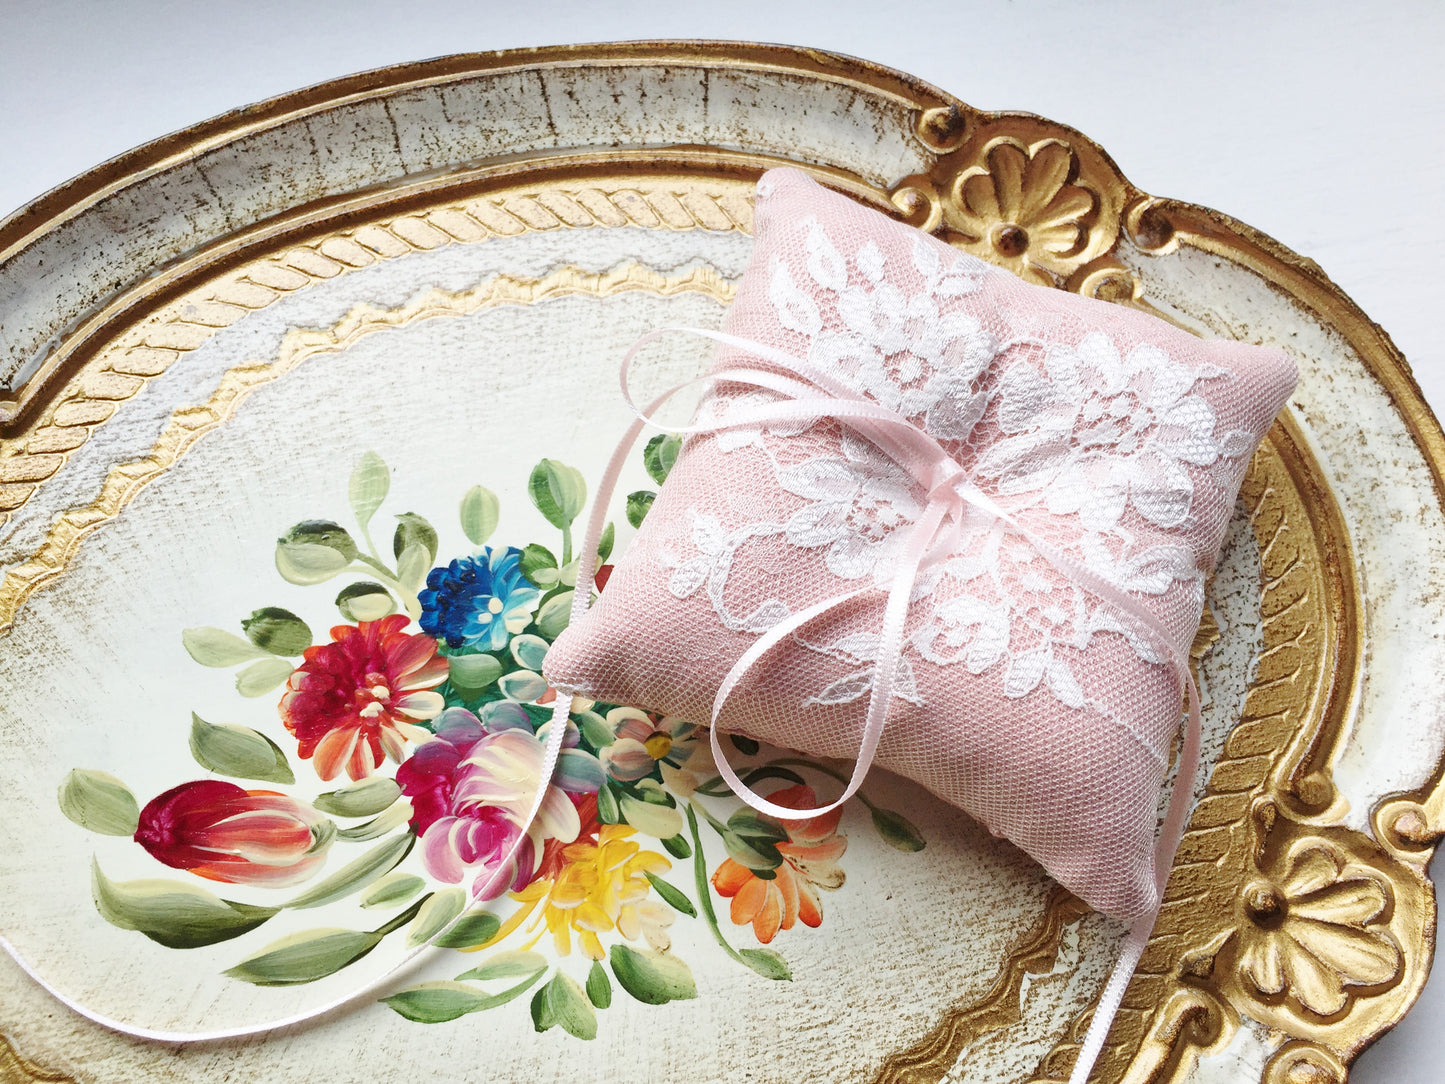 Shabby Chic Dainty Lace Ring Pillow in Vintage Pink